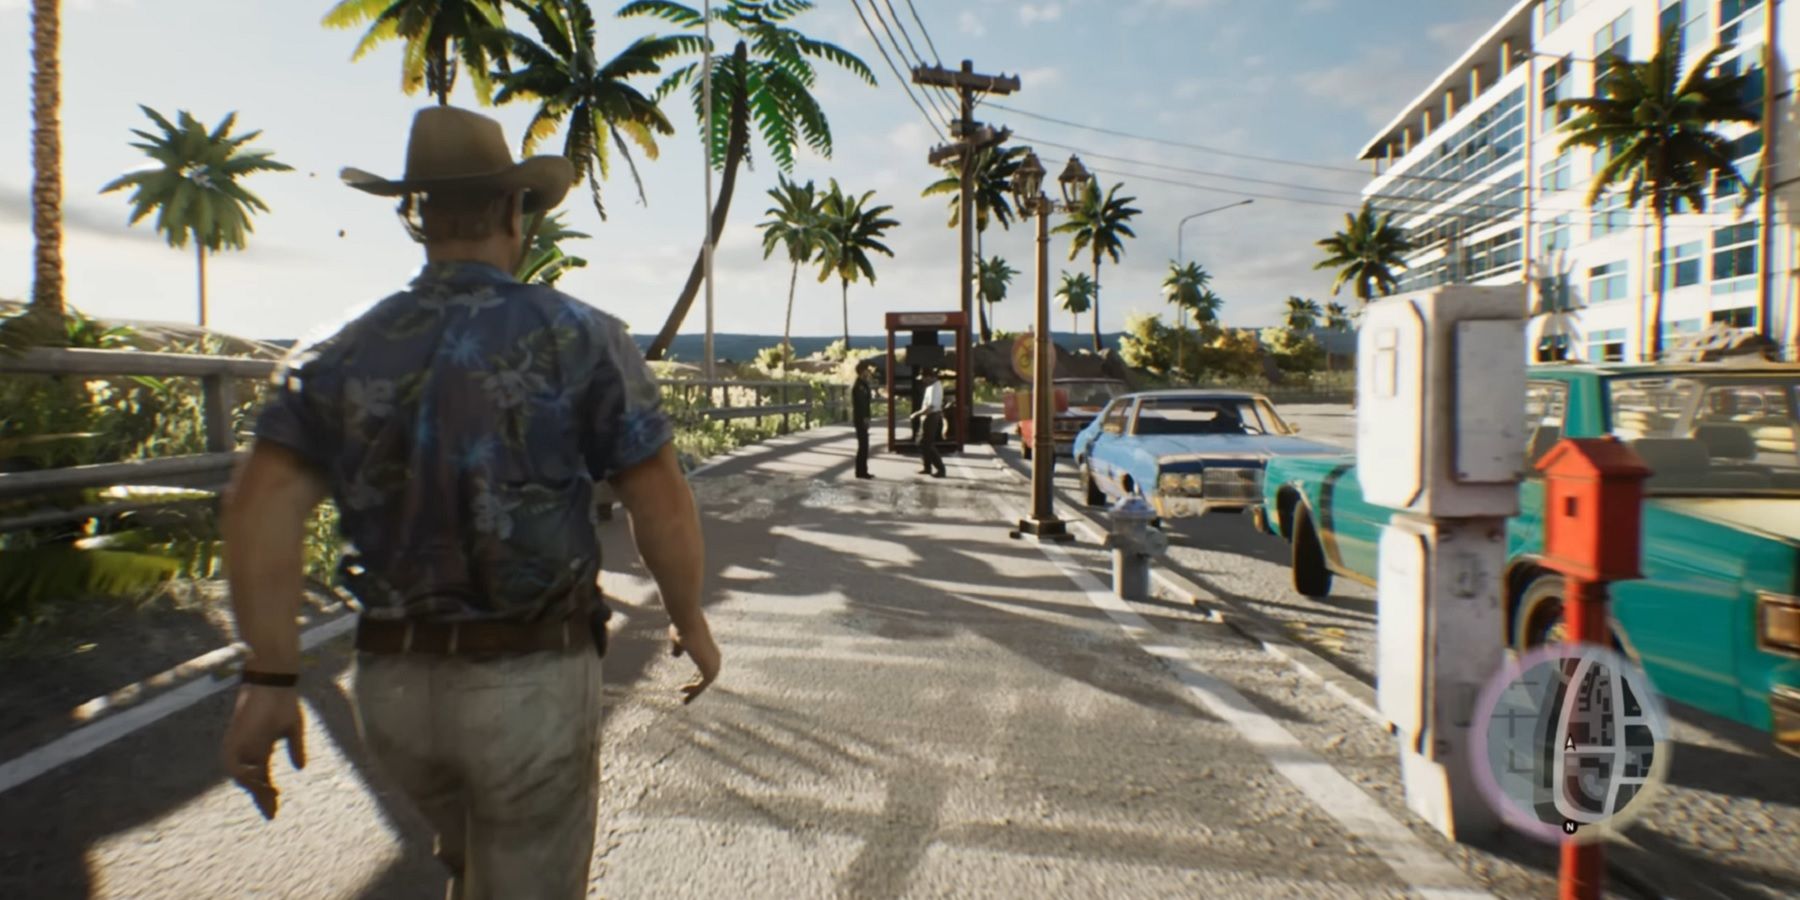 grand theft auto 6 concept video with character and map